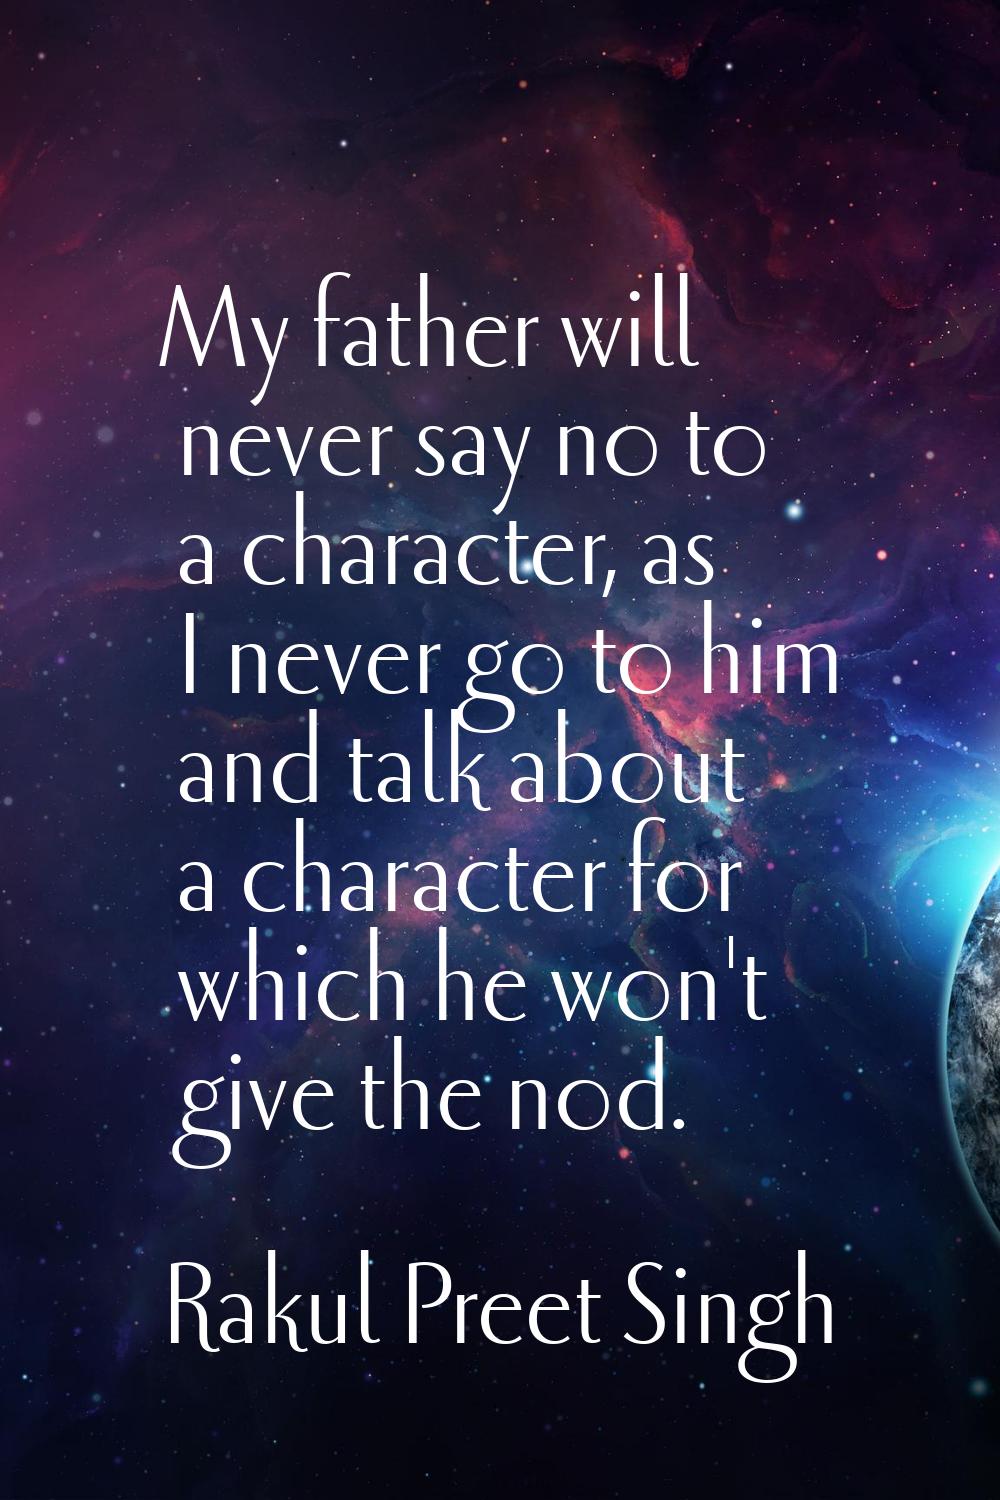 My father will never say no to a character, as I never go to him and talk about a character for whi